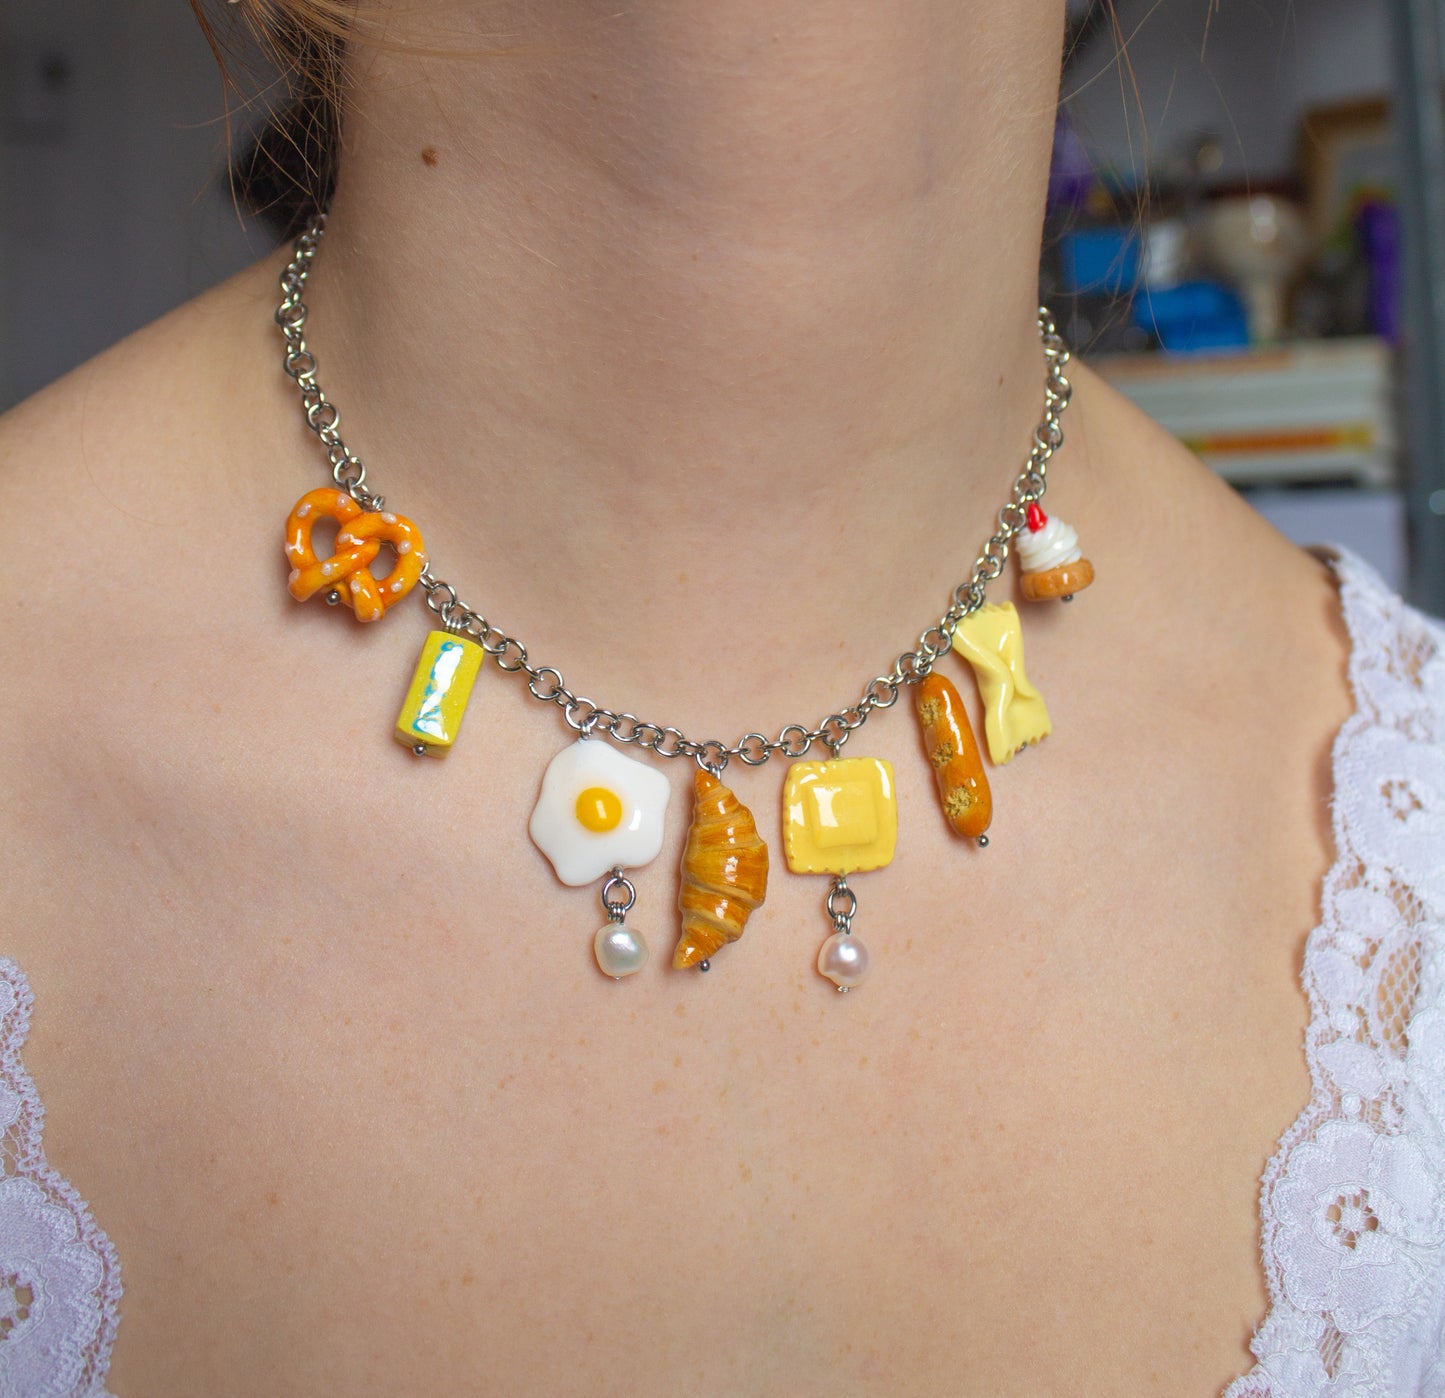 "Viennoiseries" charm necklace